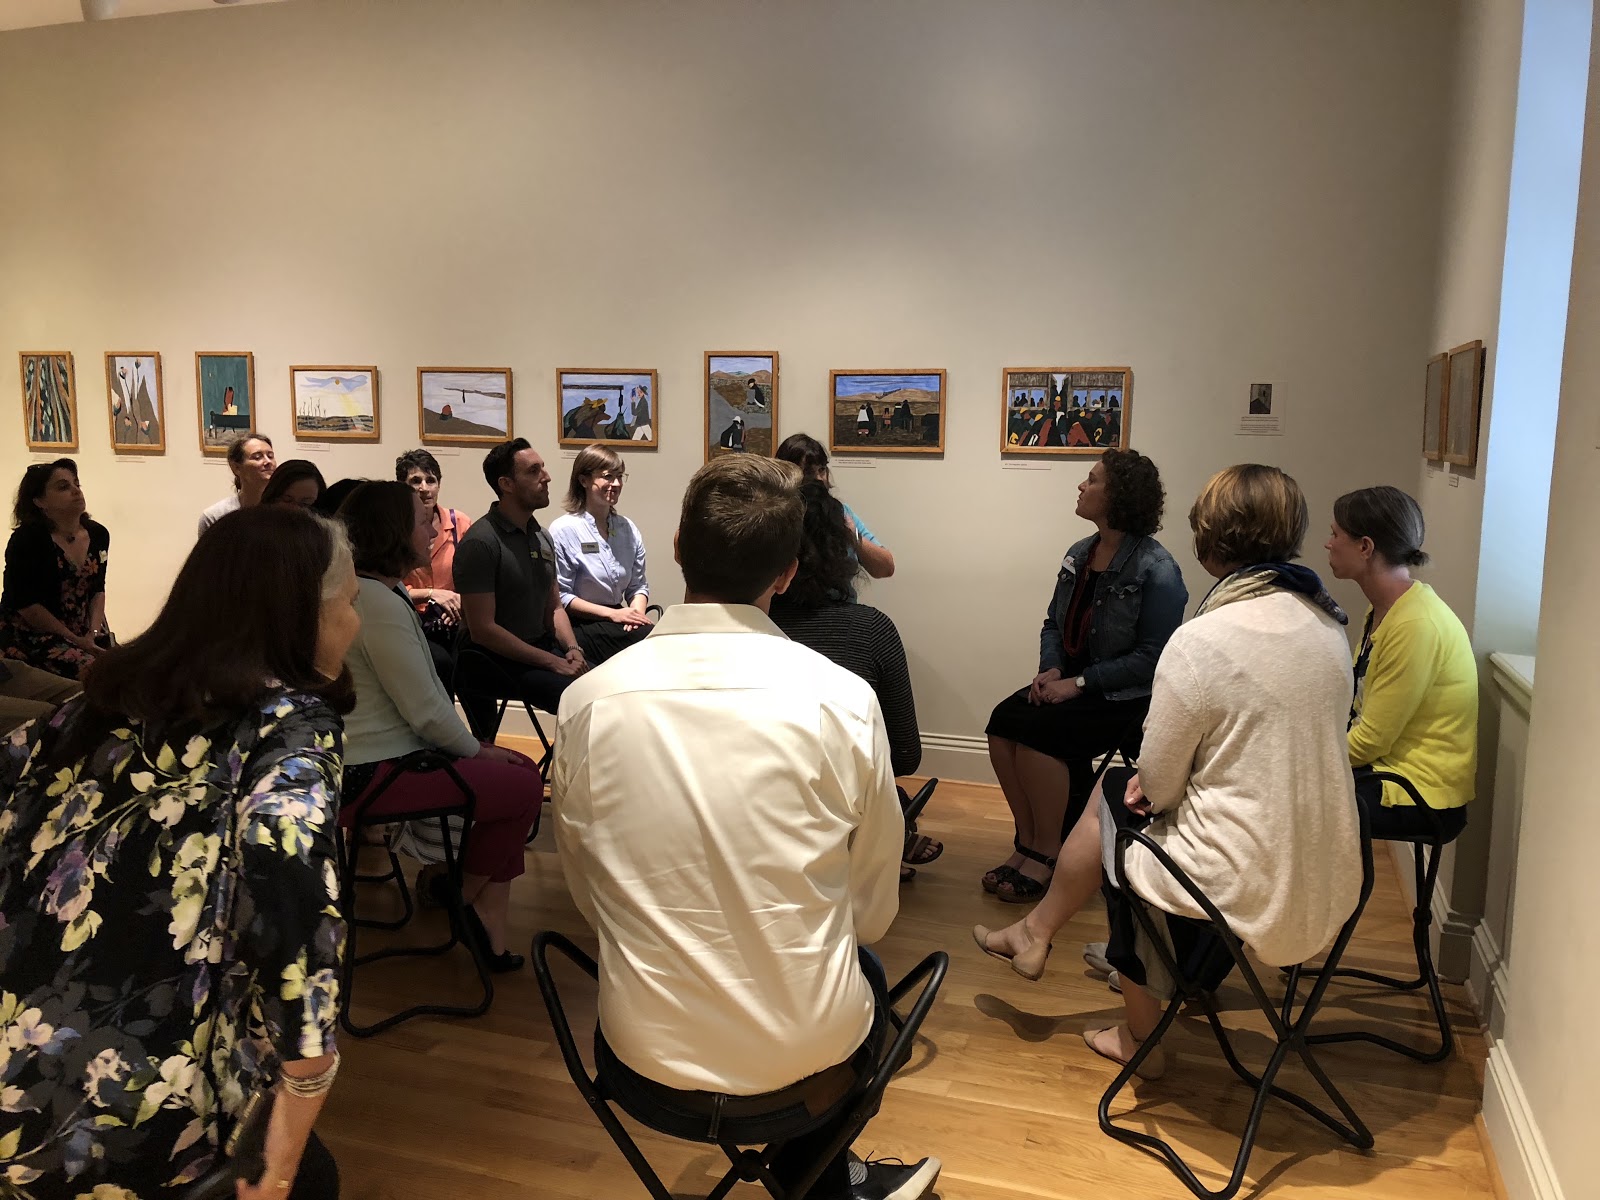 MER President Amanda Thompson Rundahl, seated third from the right, leads a reflection activity in the exhibition "Jacob Lawrence: The Migration Series" at The Phillips Collection during the 2018 MER Board Retreat. 